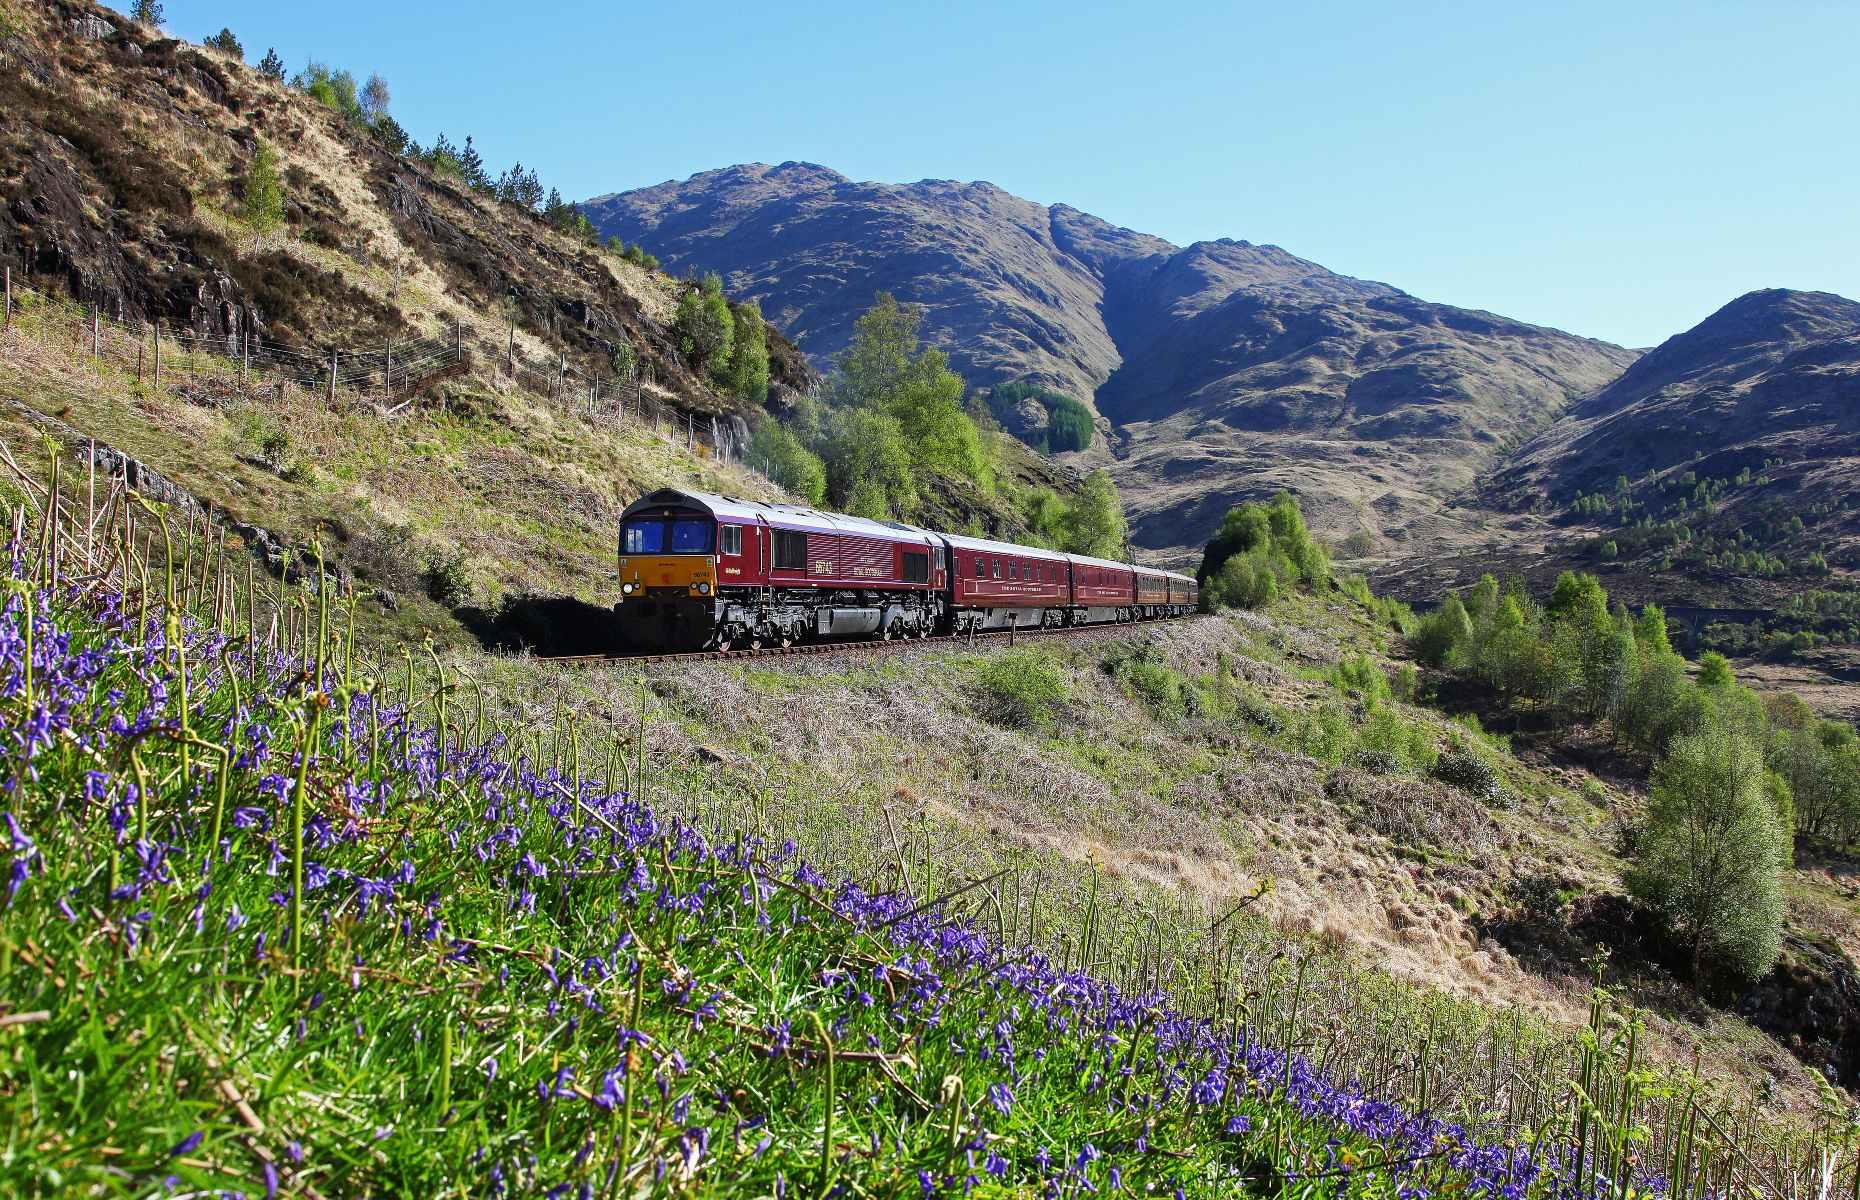 <p><a href="https://www.belmond.com/trains/europe/scotland/belmond-royal-scotsman/journeys/scotlands-classic-splendour">Scotland’s Classic Splendours Tour</a> is an epic cross-country journey through the heart of Scotland. Passengers step aboard a luxury Royal Scotsman Belmond train for a 720-mile (1,159km) round trip venturing through the middle of the Scottish Highlands. Spread across five days, the journey begins in Edinburgh, taking in cities including Dundee, Inverness, Montrose and Perth before looping back to the capital. The train also passes through the Cairngorms National Park, the largest in the UK, and the famous Forth Bridge, one of the greatest crossings in the world. </p>